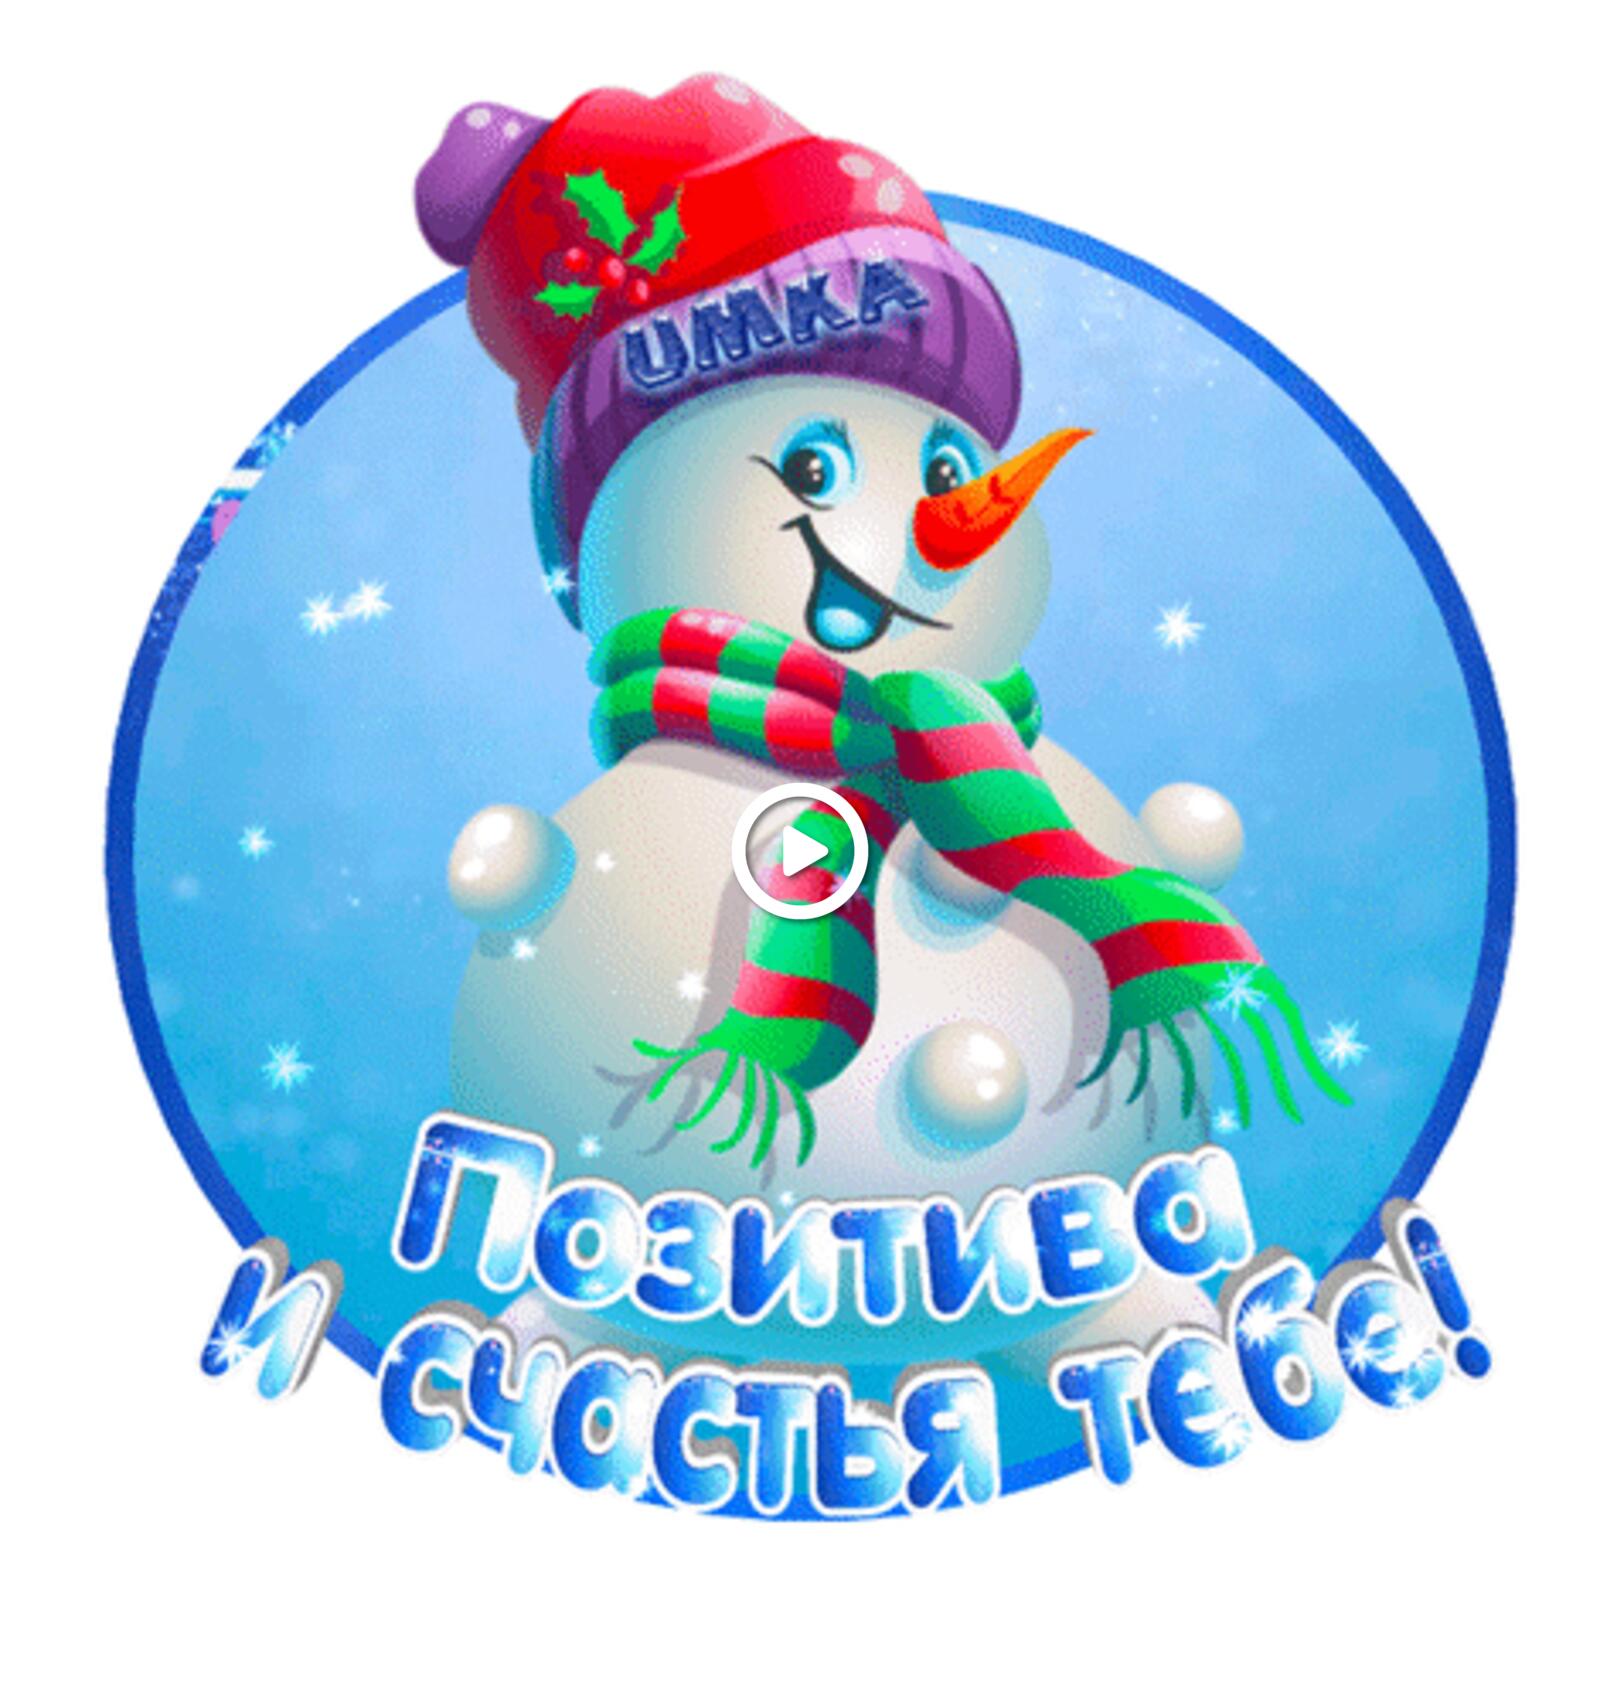 A postcard on the subject of snowman snowflakes good wishes for free